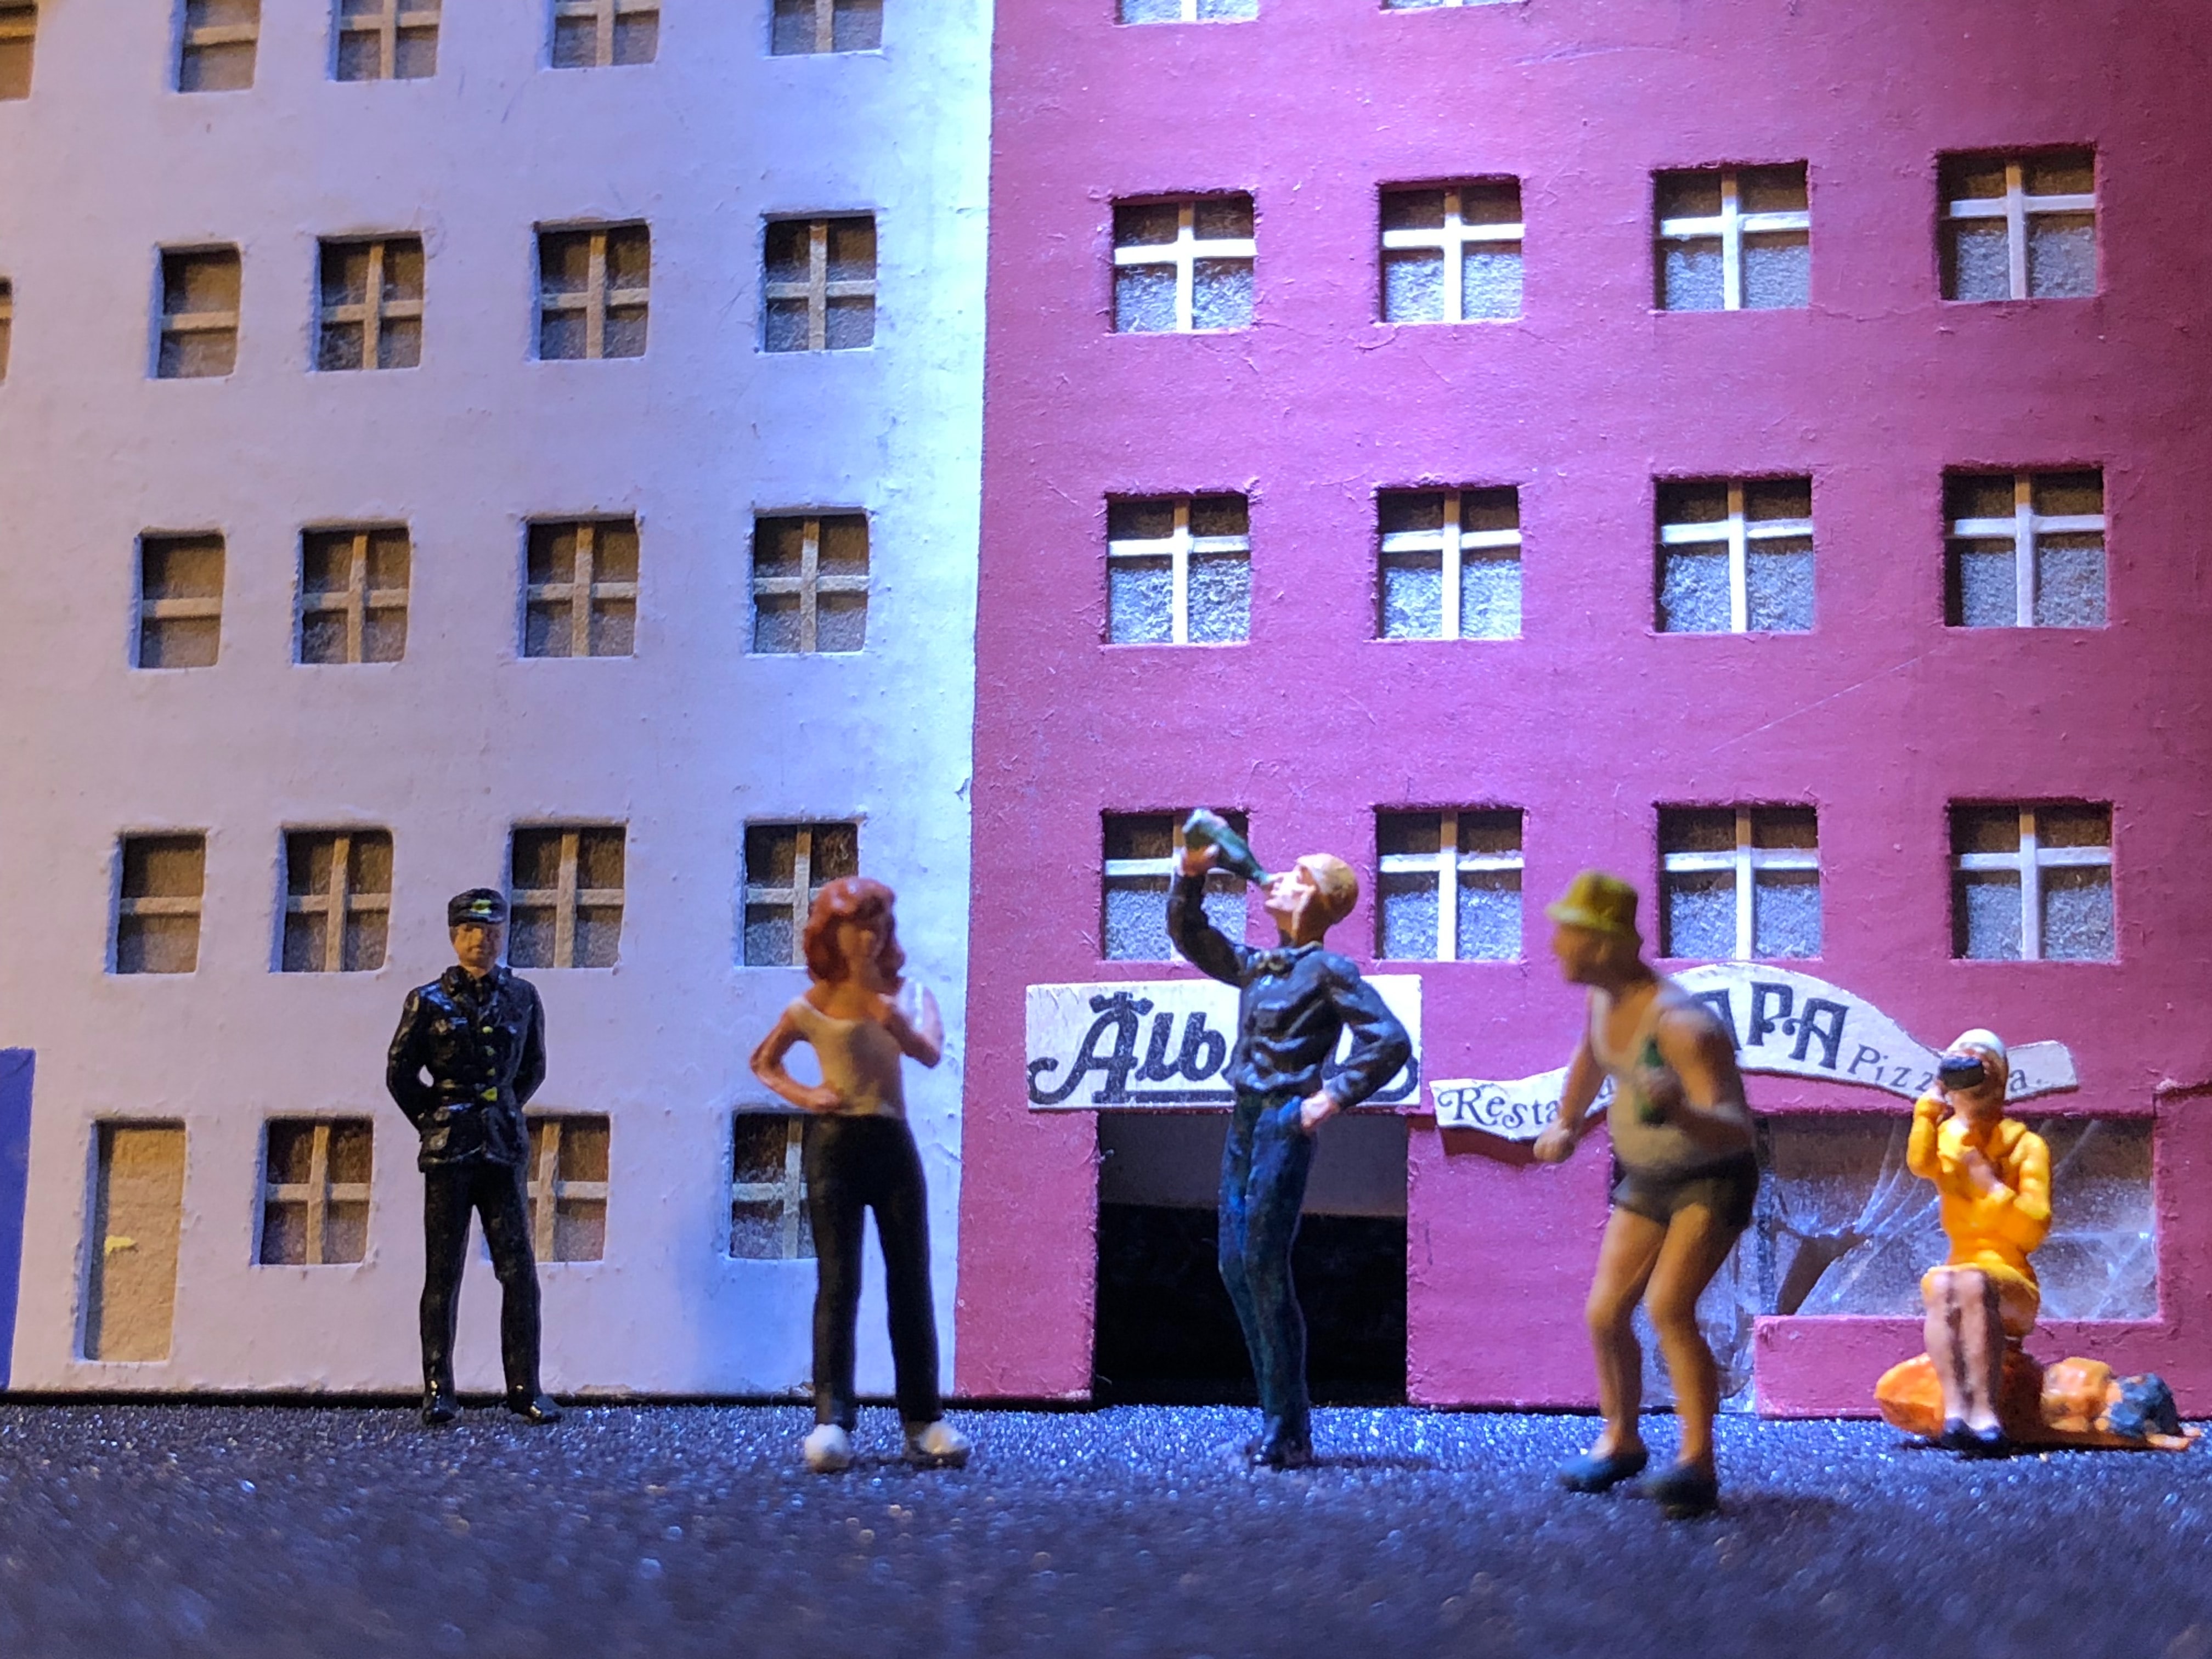 Plastic figures in front of buliding mock-up, one drinking from bottle; image by Claus Jensen, via Unsplash.com.